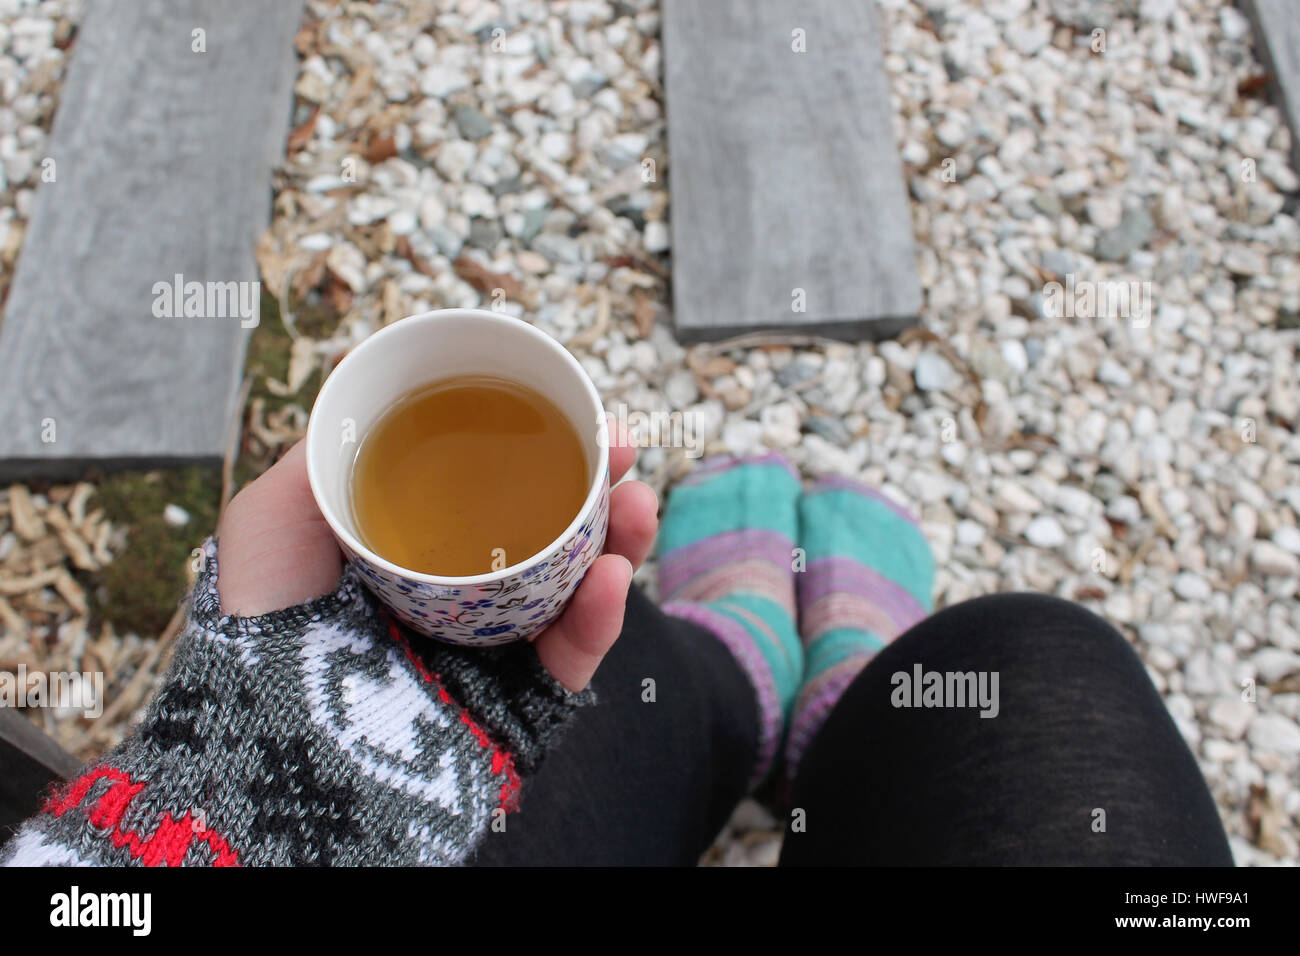 Top view of lady sitting down in muted grey outdoor light, holding a cup of tea, wearing cosy winter colourful socks and mittens. Stock Photo